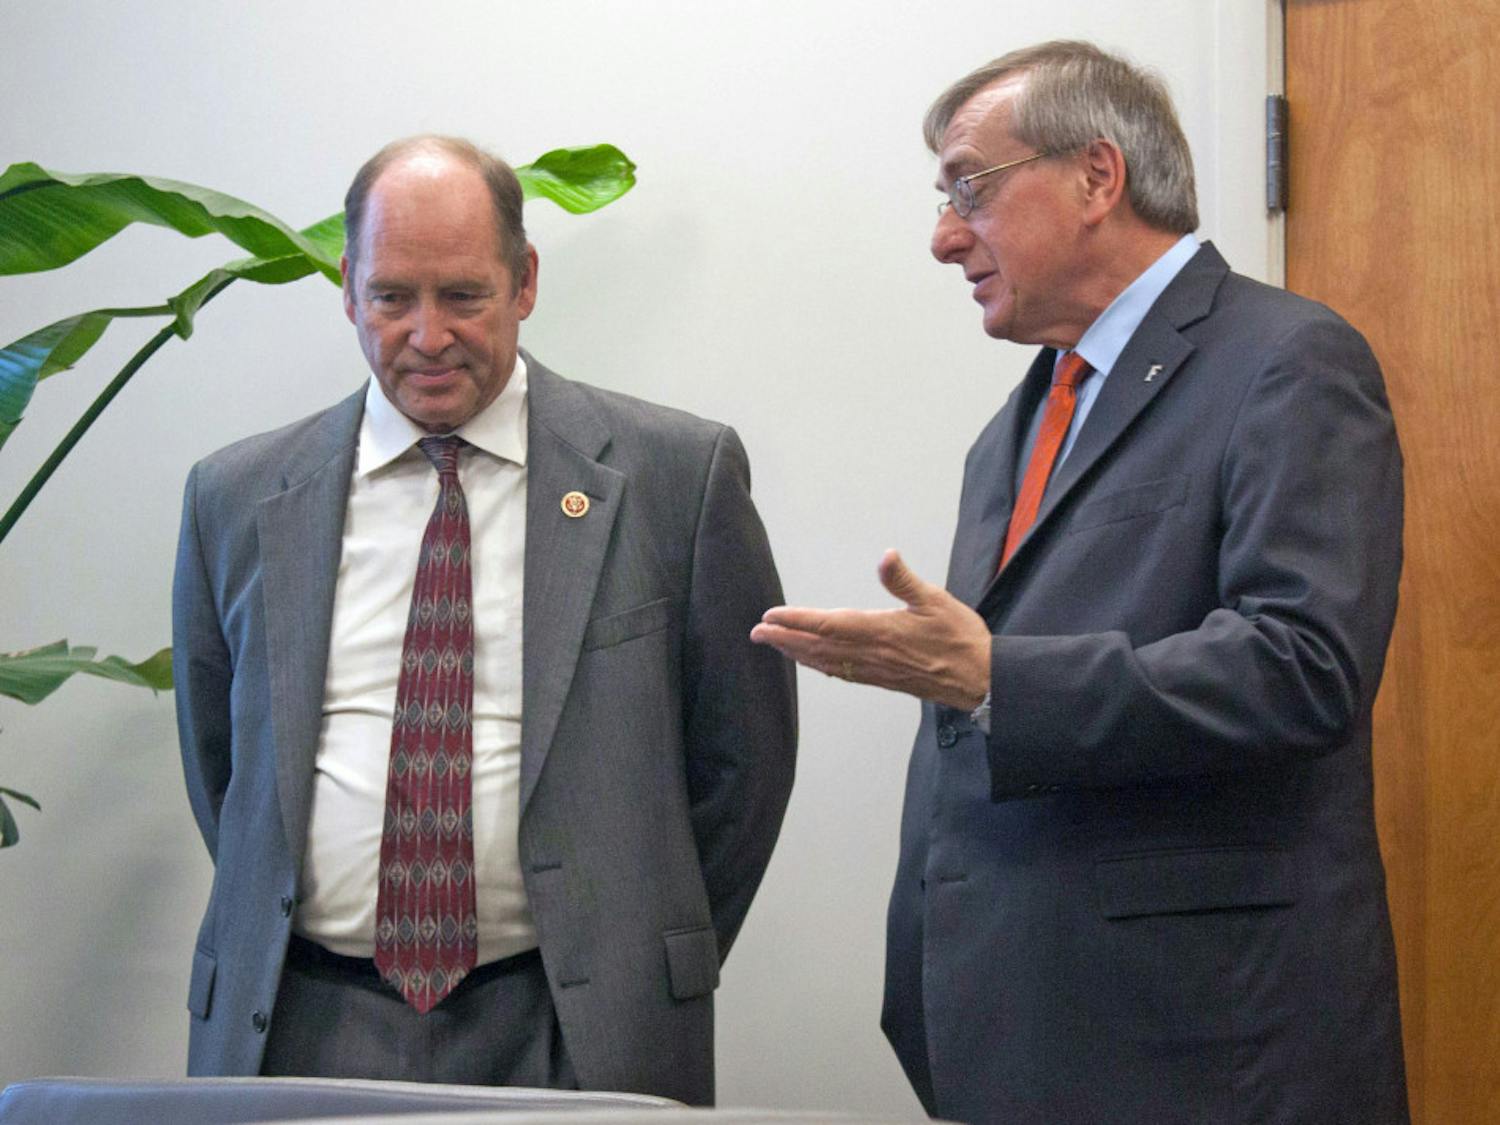 Congressman Ted Yoho and UF President Kent Fuchs discuss the process of the National Science Foundation conference before it begins. Fuchs invited Yoho to visit UF on Friday.